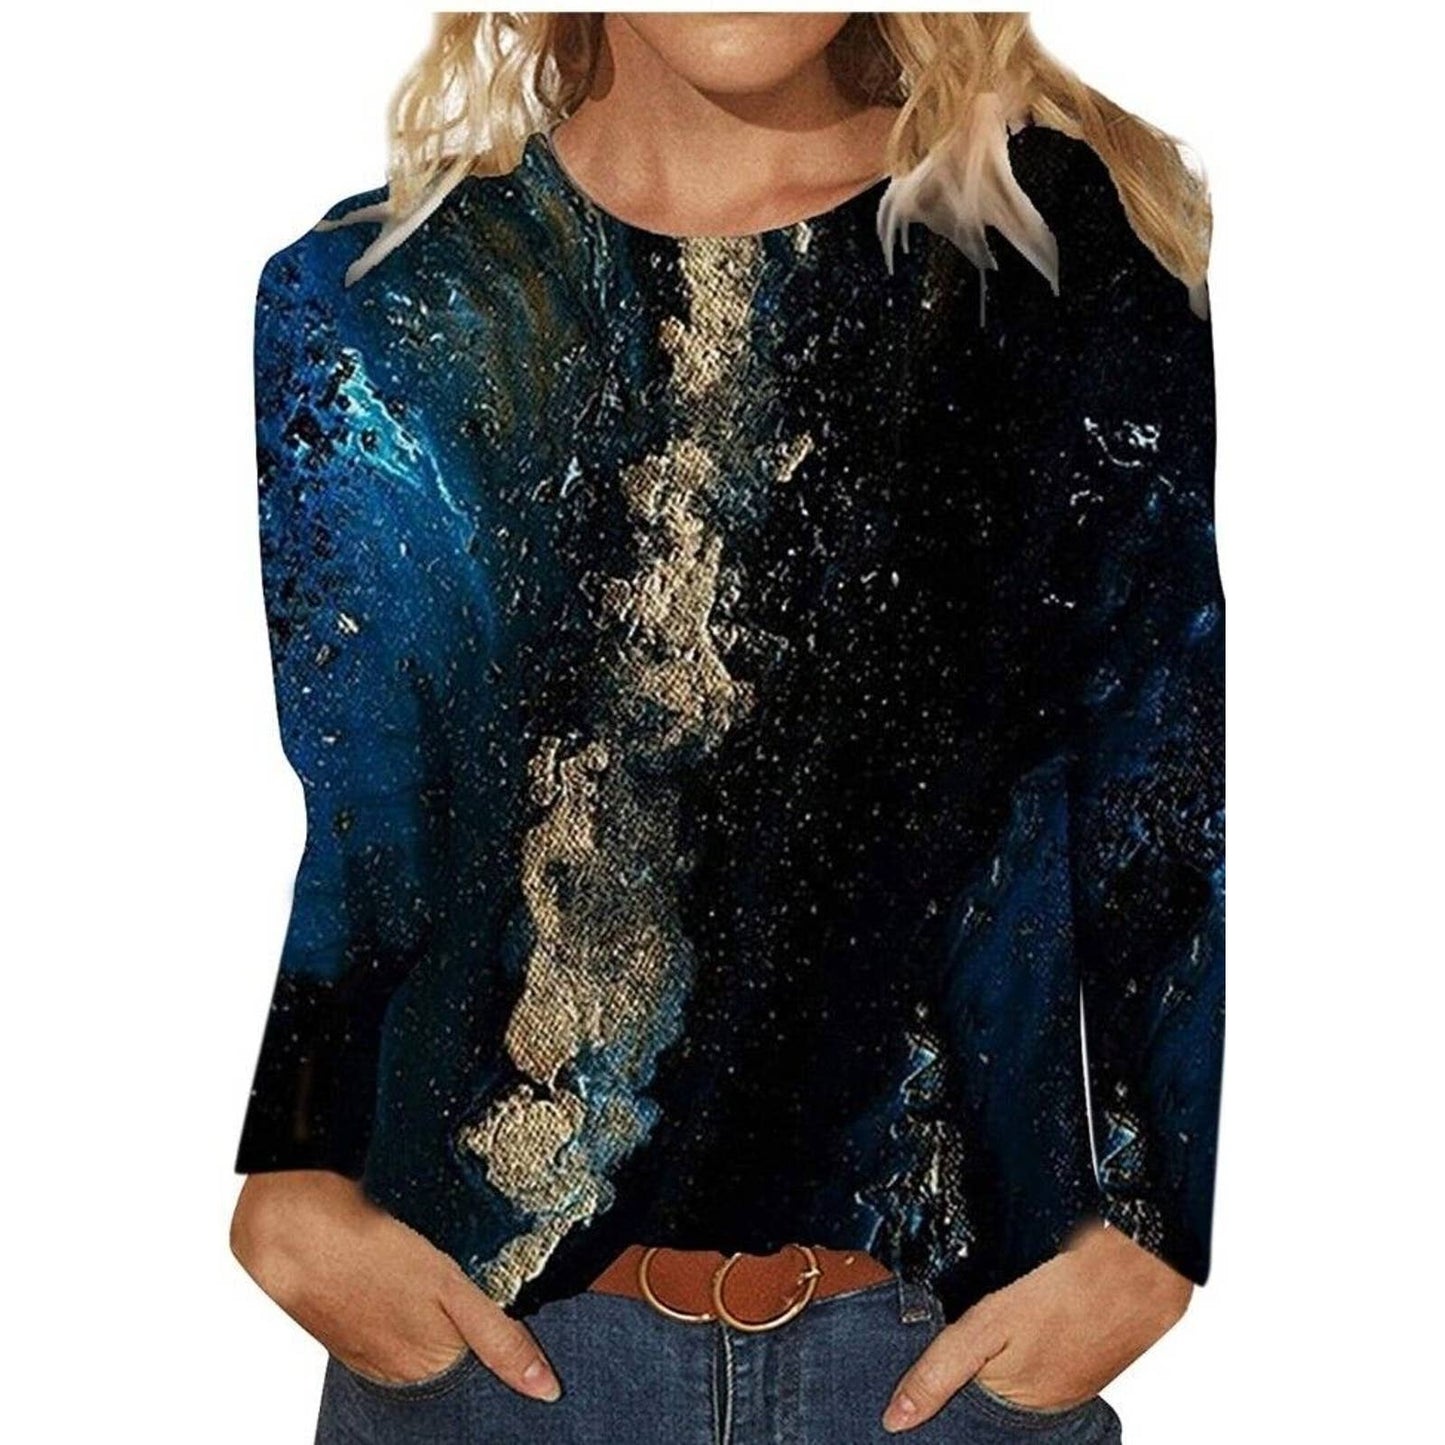 SHEIN Women's Blue Polyester Crew Neck Long Sleeve Casual Top Shirt Size Small